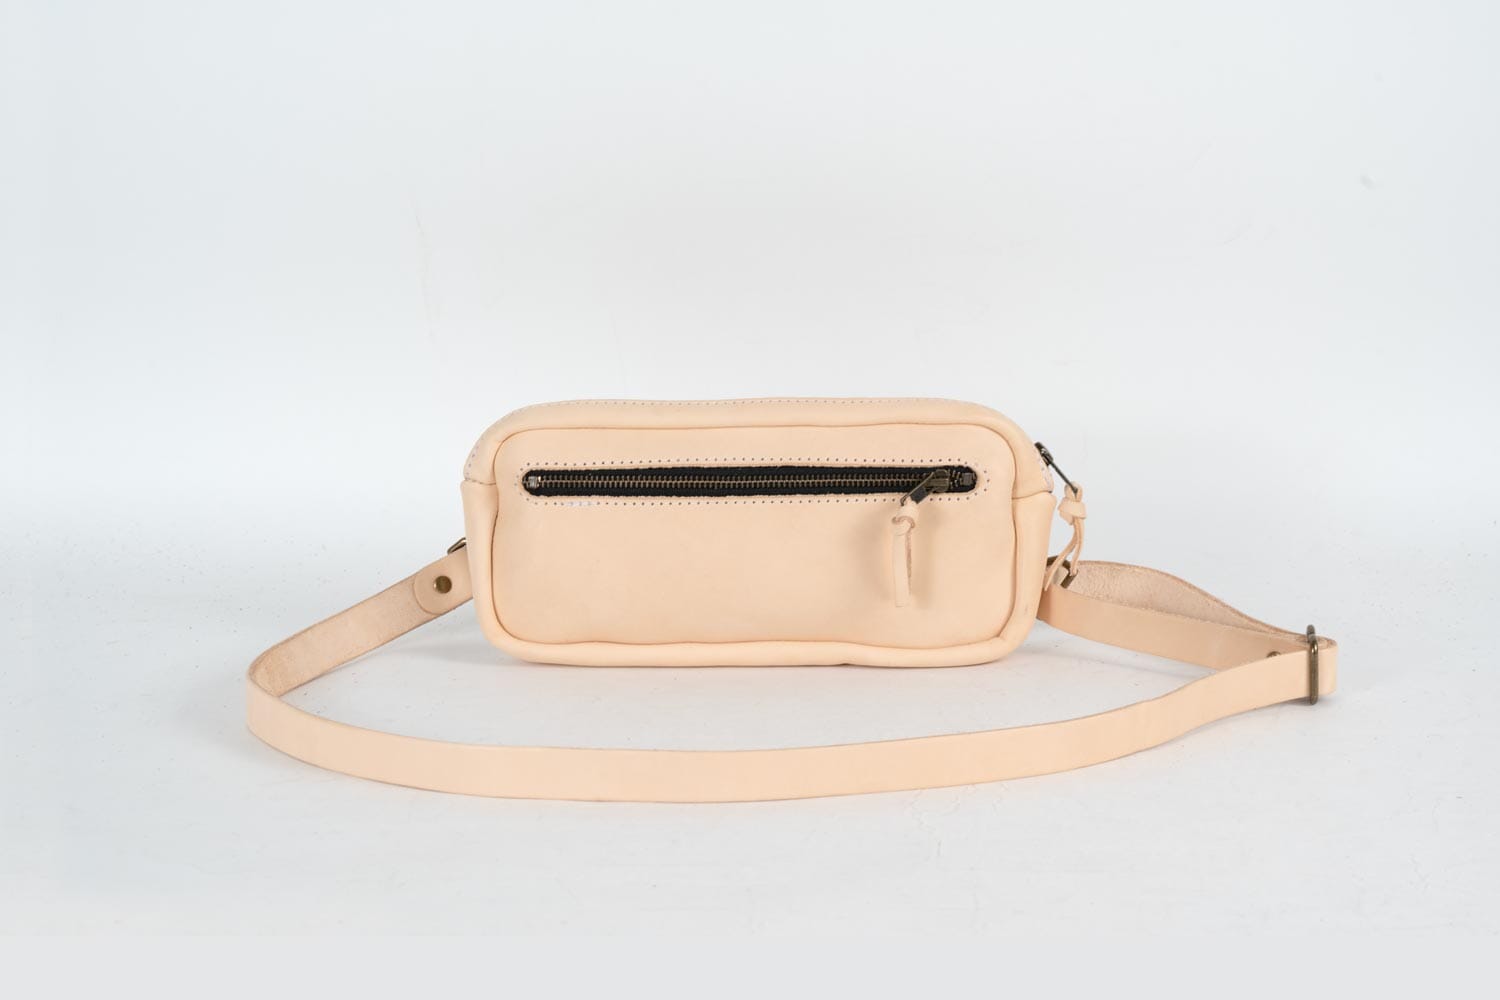 LEATHER FANNY PACK / LEATHER WAIST BAG - DELUXE - NATURAL VEG TAN